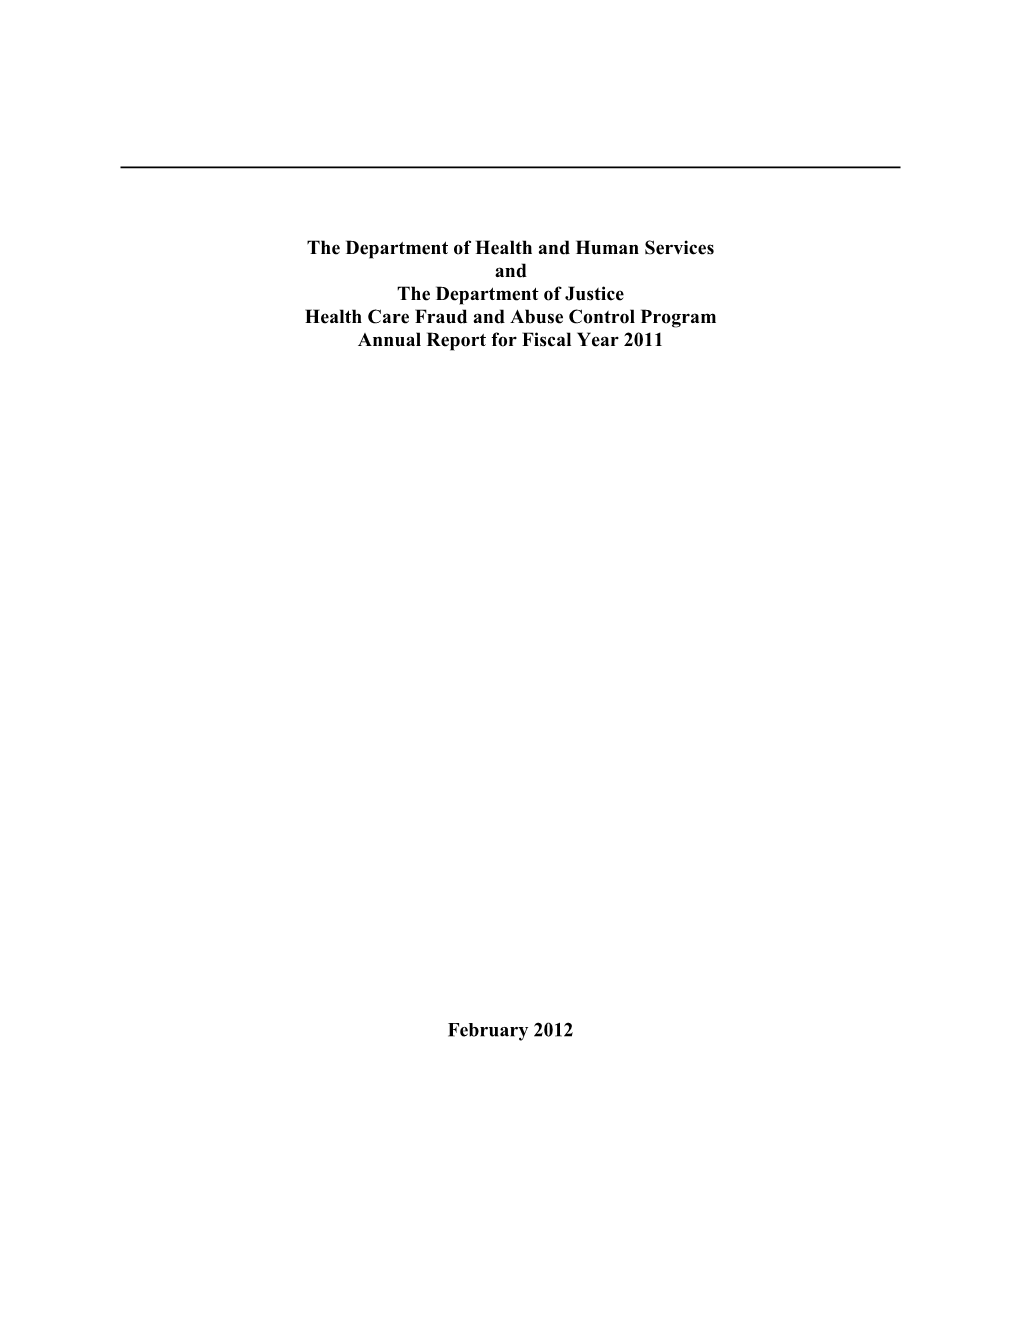 Health Care Fraud and Abuse Control Program Annual Report for Fiscal Year 2011